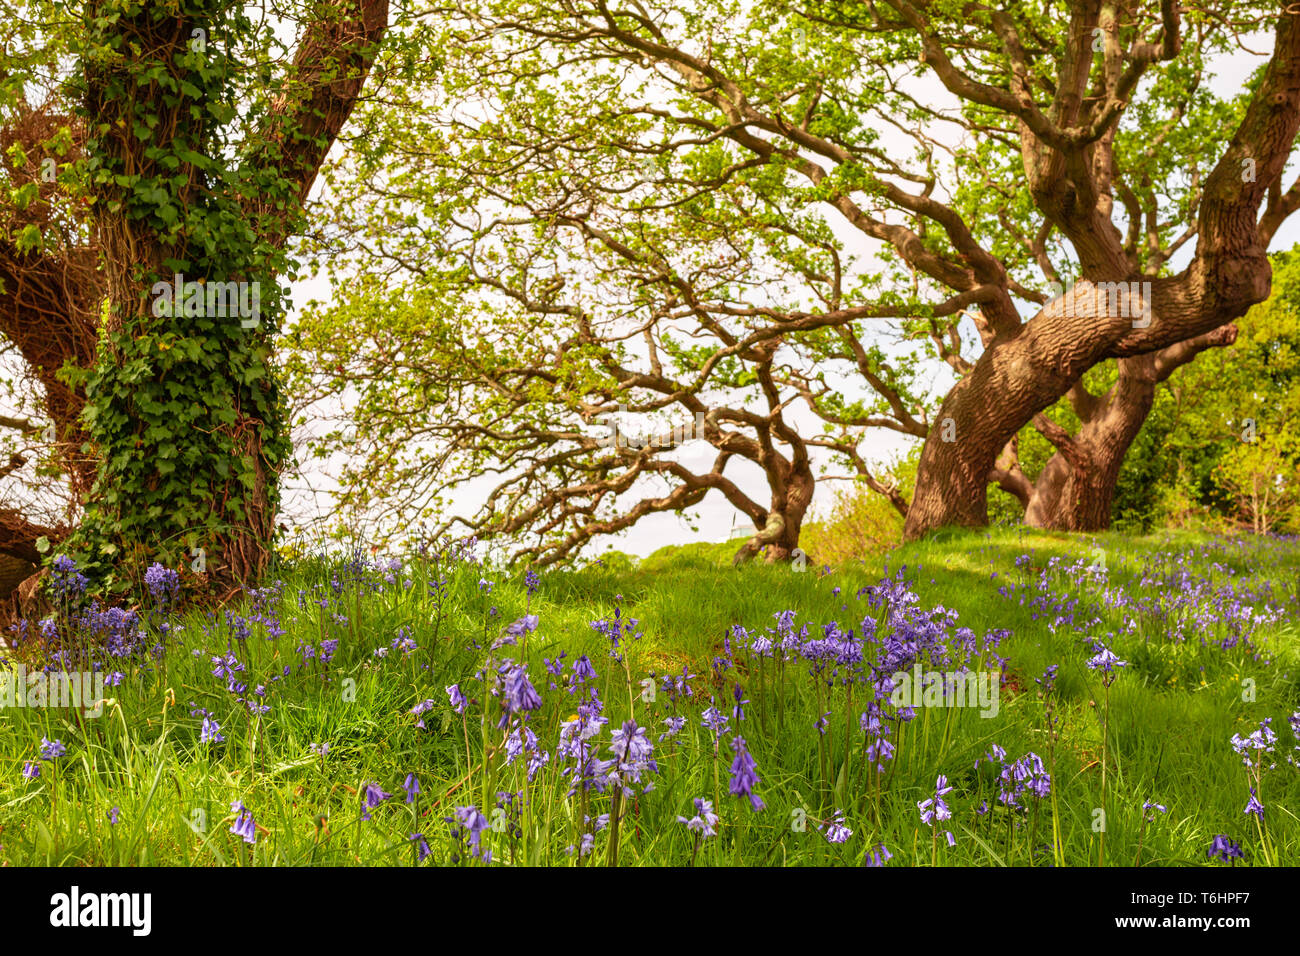 Colour landscape photograph of carpet of spanish bluebells in bloom under windswept trees in background, Taken in Poole, Dorset, England. Stock Photo